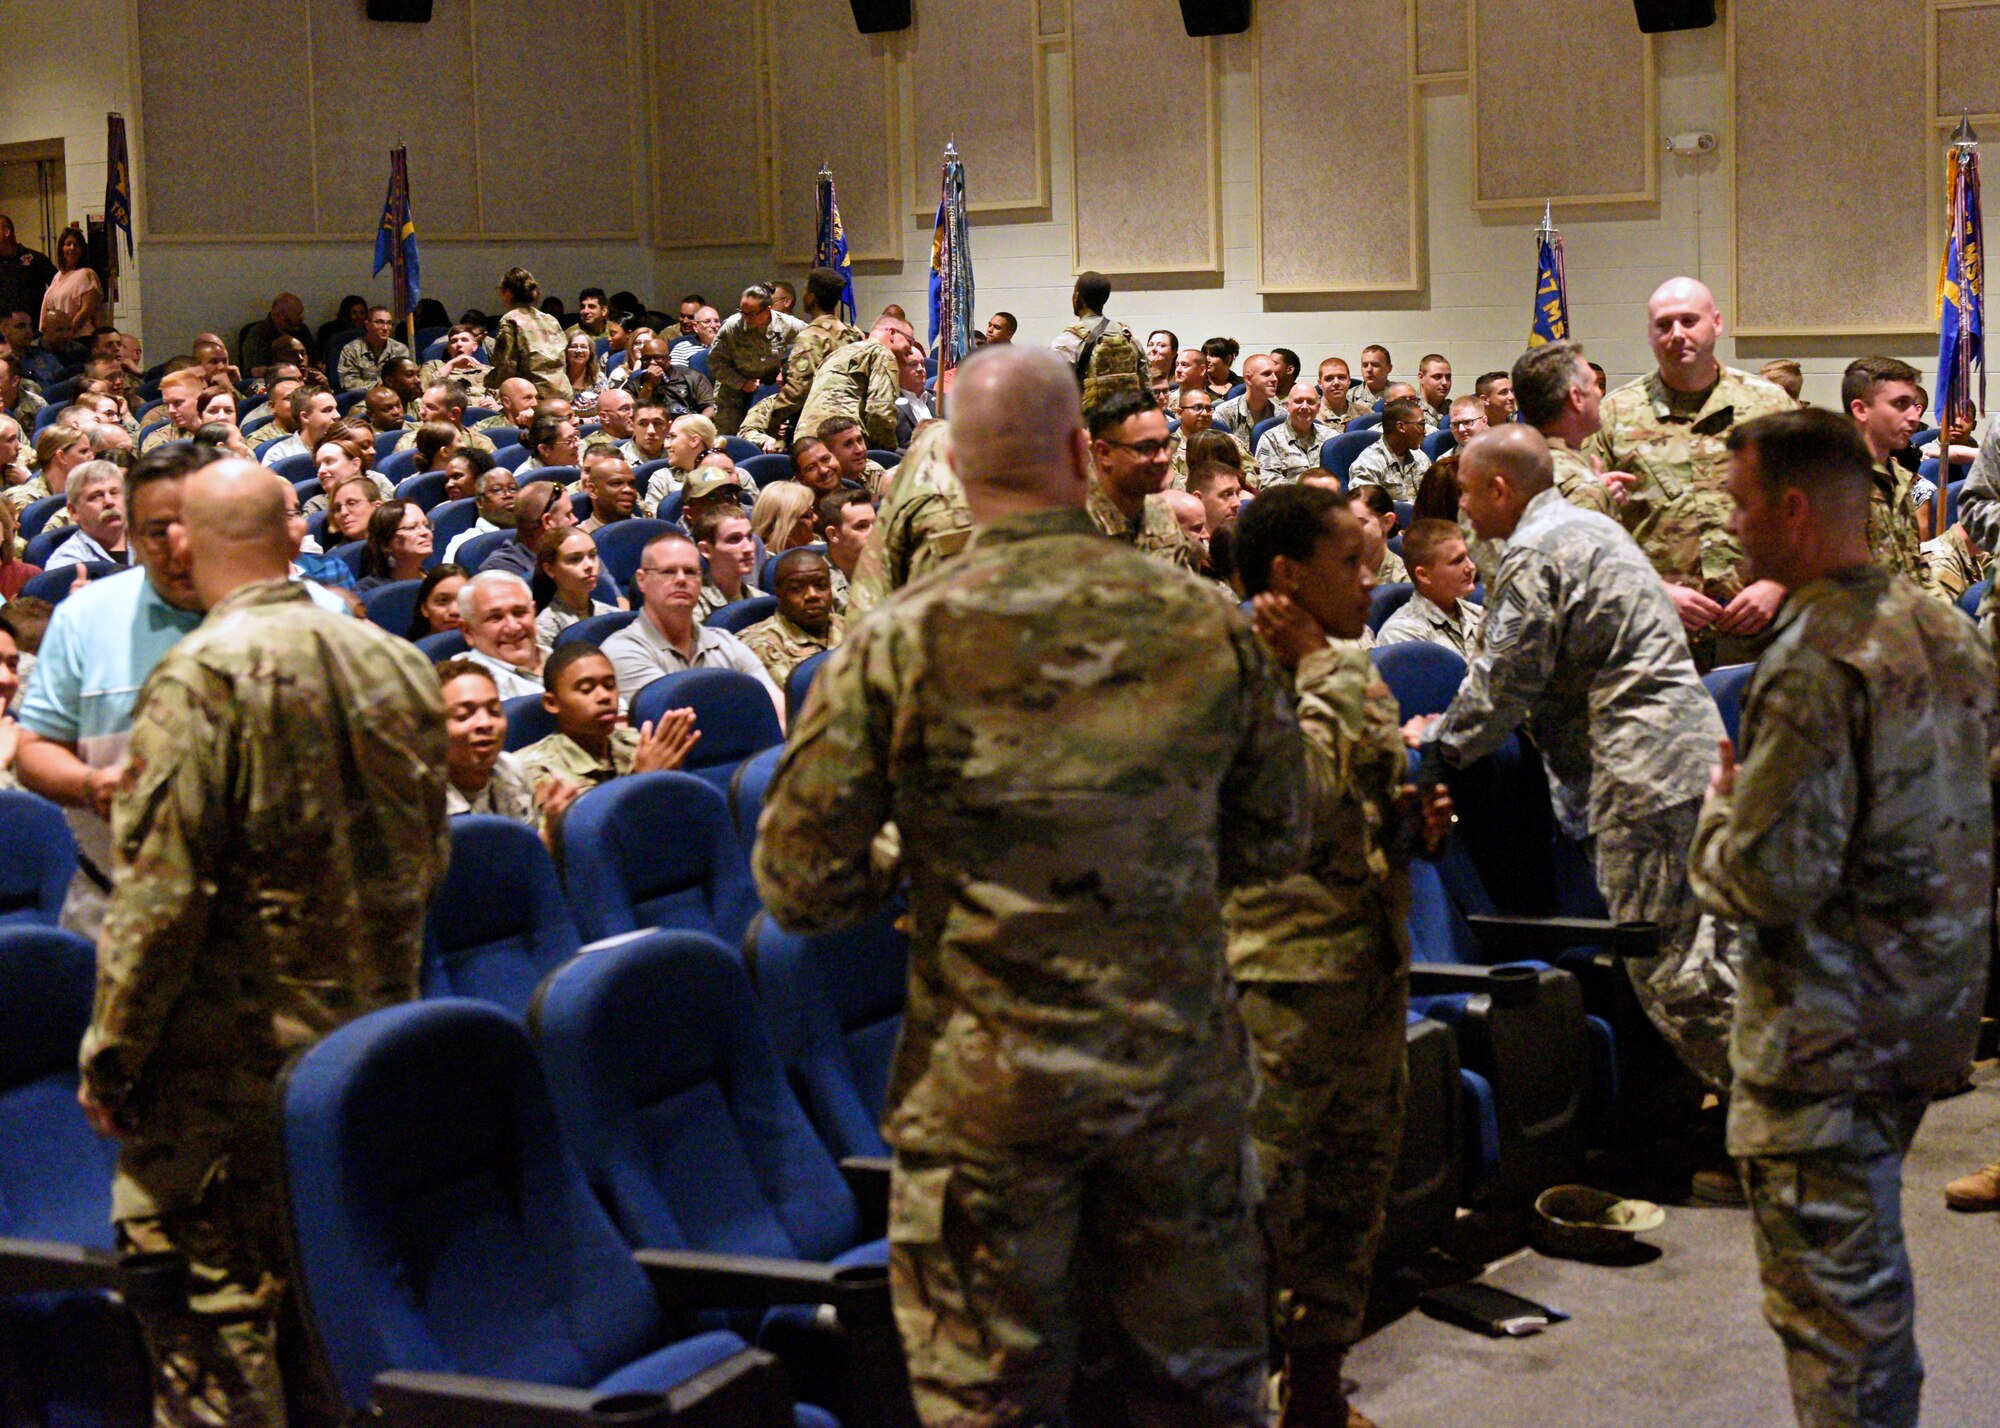 U.S. Air Force Col. Andres Nazario, 17th Training Wing commander, instigated an exercise encouraging personnel to reach out and talk to someone they had not previously met during a commander’s call at the base theater on Goodfellow Air Force Base, Texas, July 25, 2019. This exercise was used to show how interacting with new faces could influence an environment for the better. (U.S. Air Force photo by Airman 1st Class Robyn Hunsinger/Released)